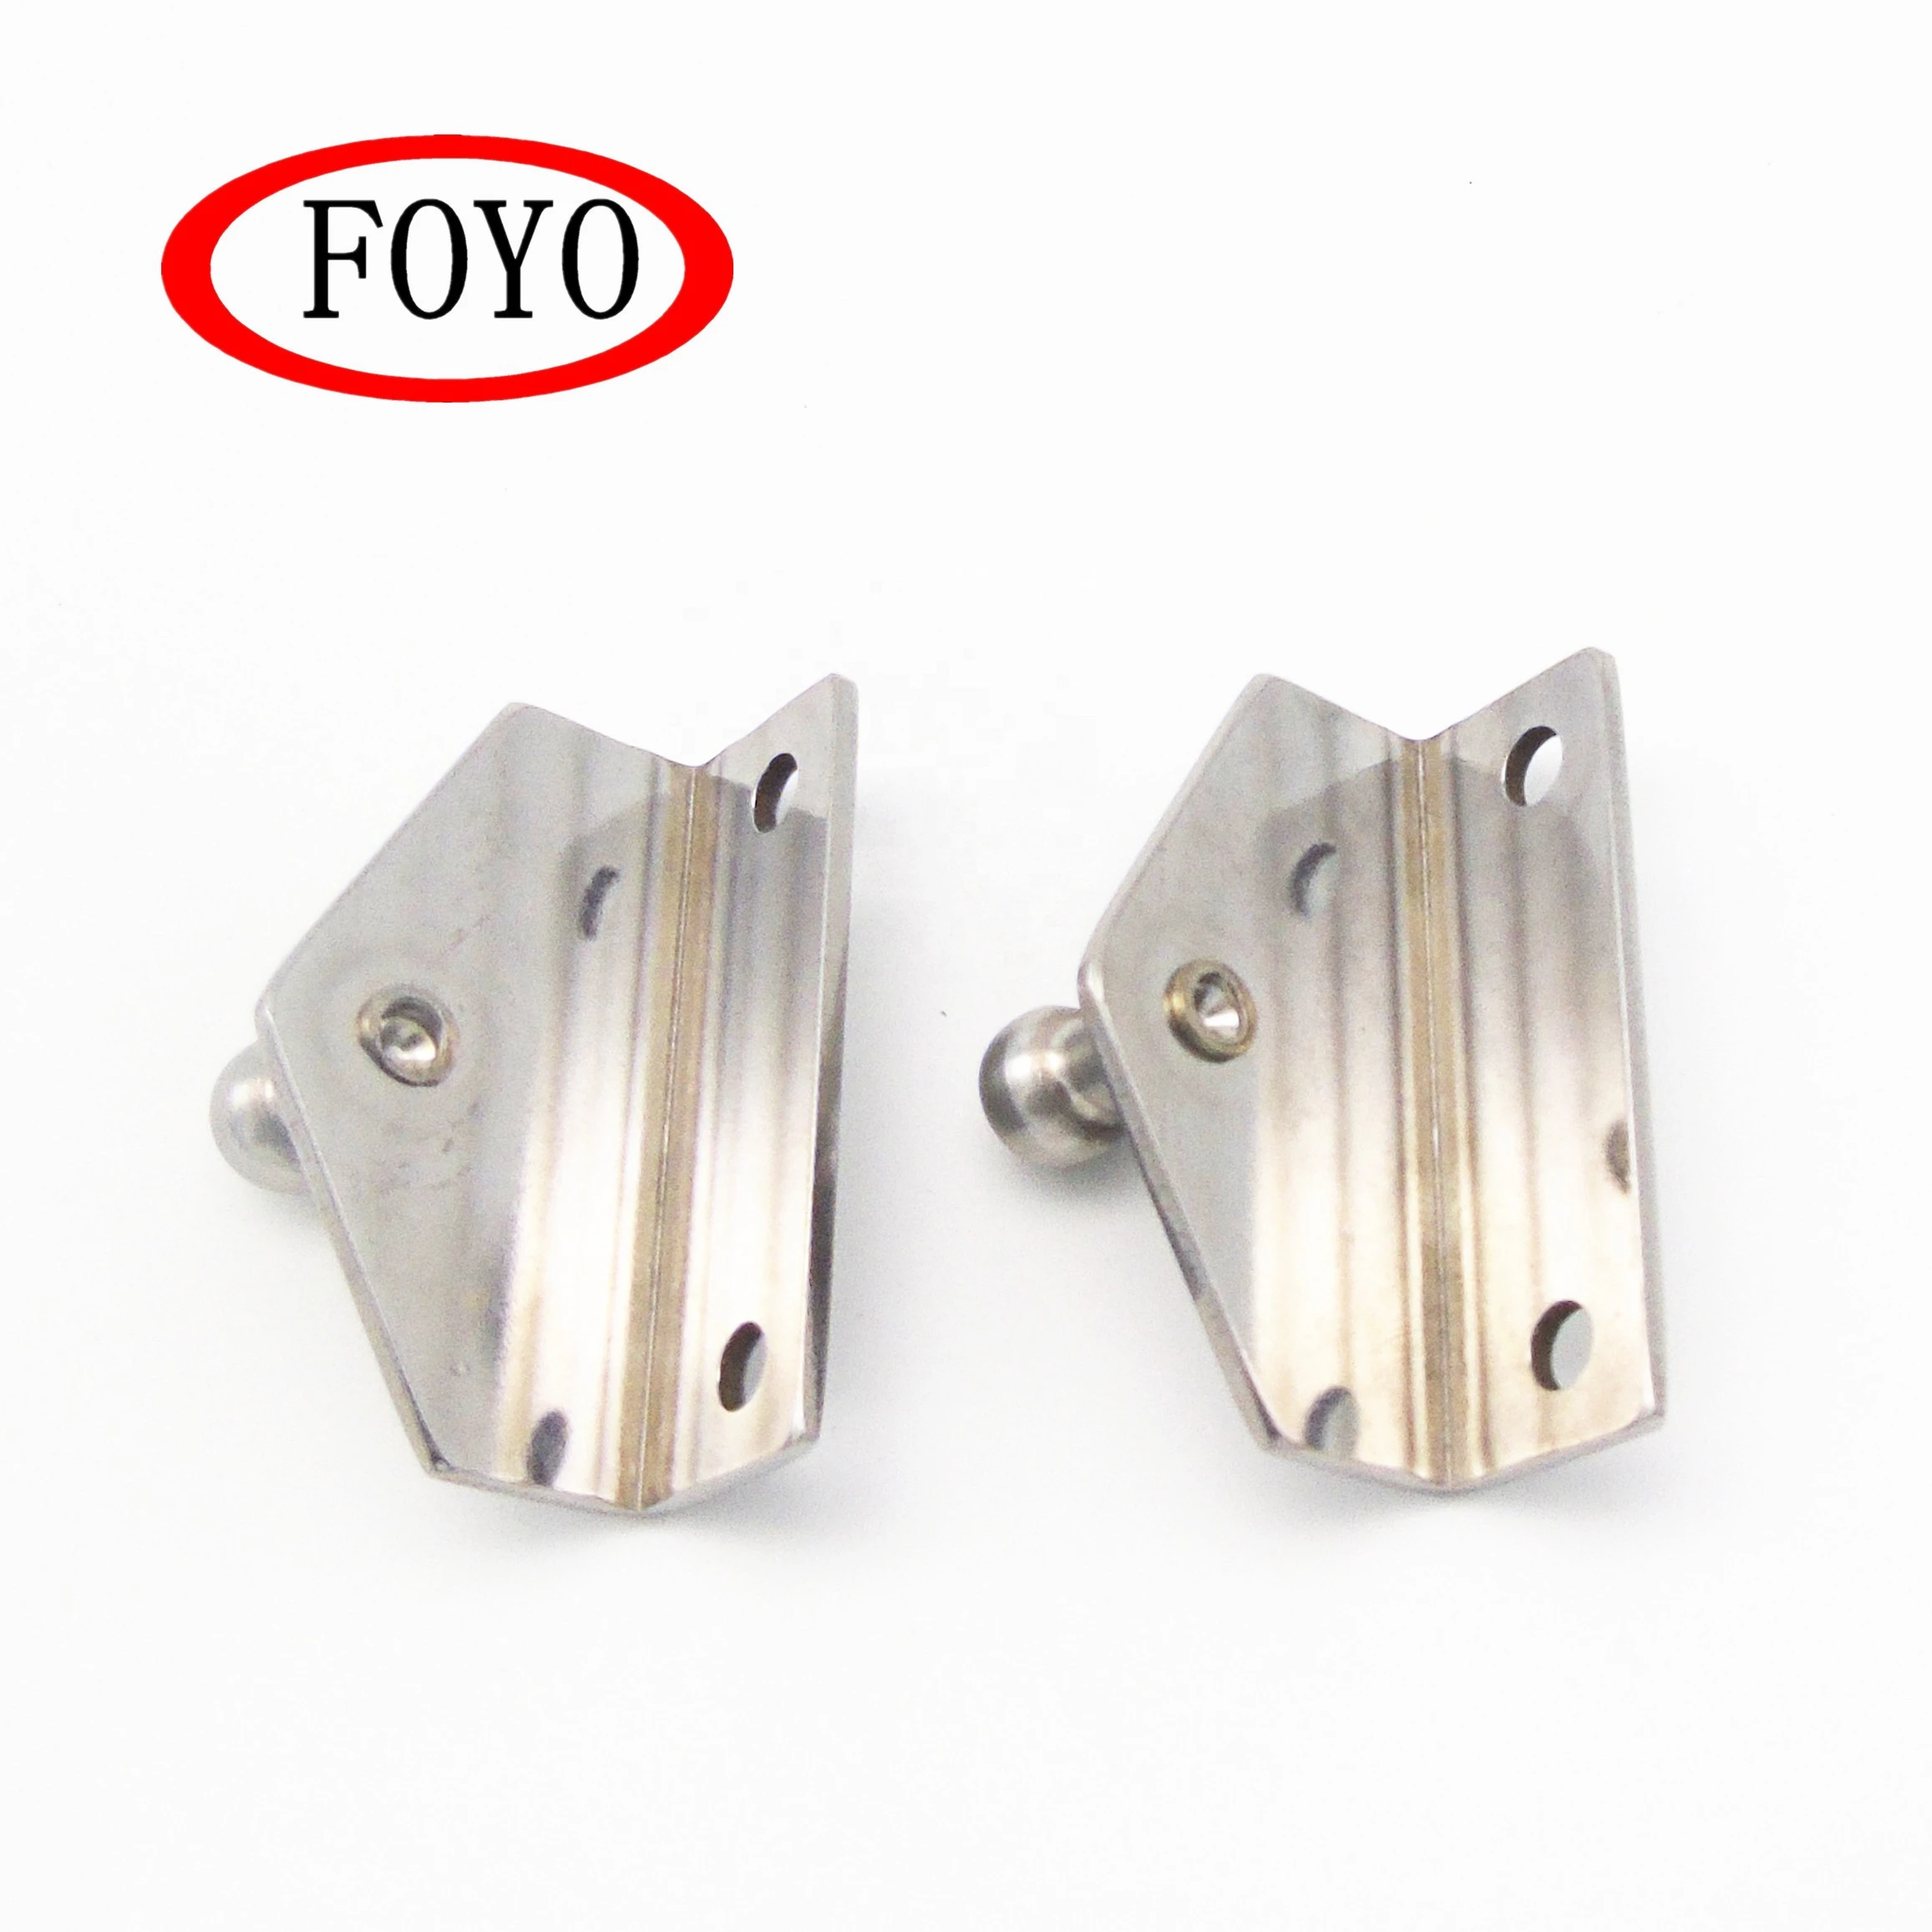 Foyo Brand Marine Hardware Stainless Steel Gas Spring Mounting Bracket for Sailboat and Boat and Kayak